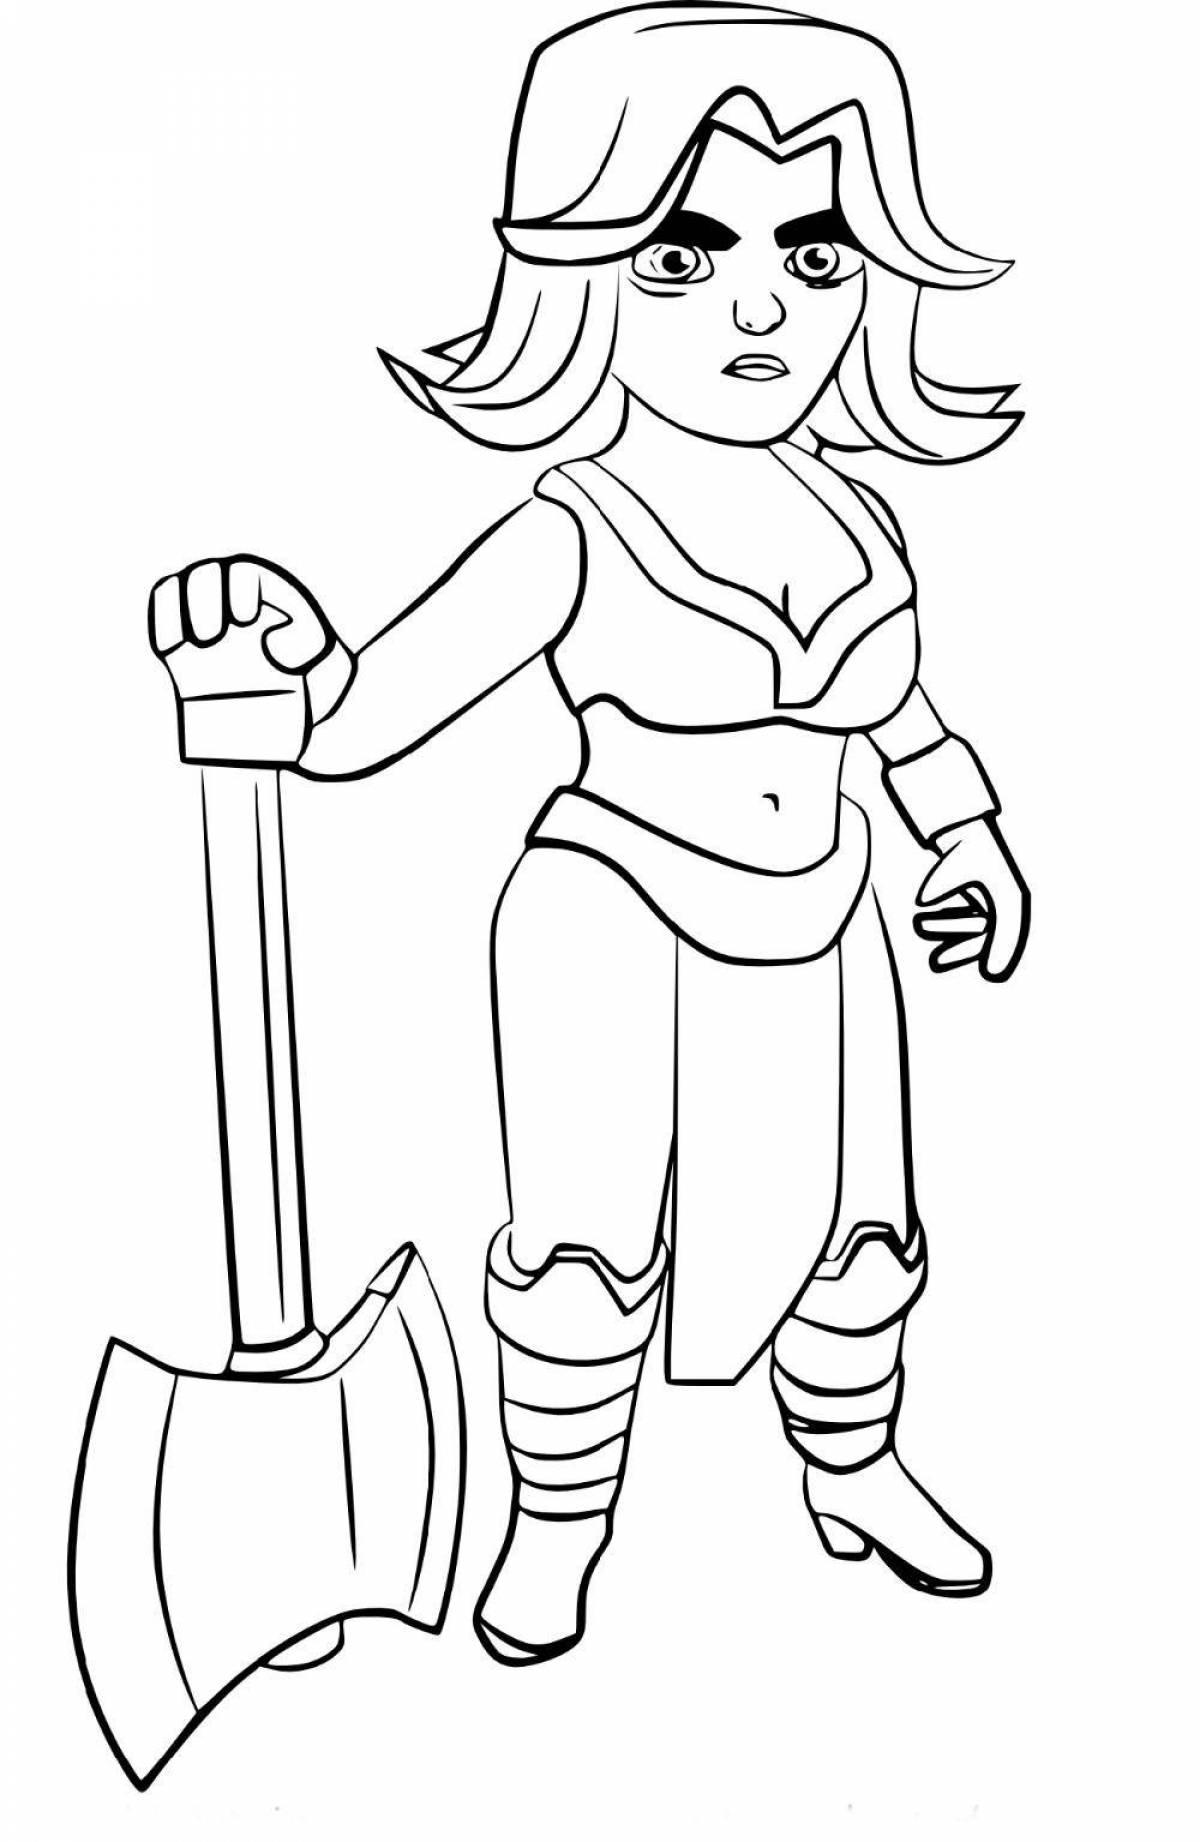 Playful clash royale coloring page